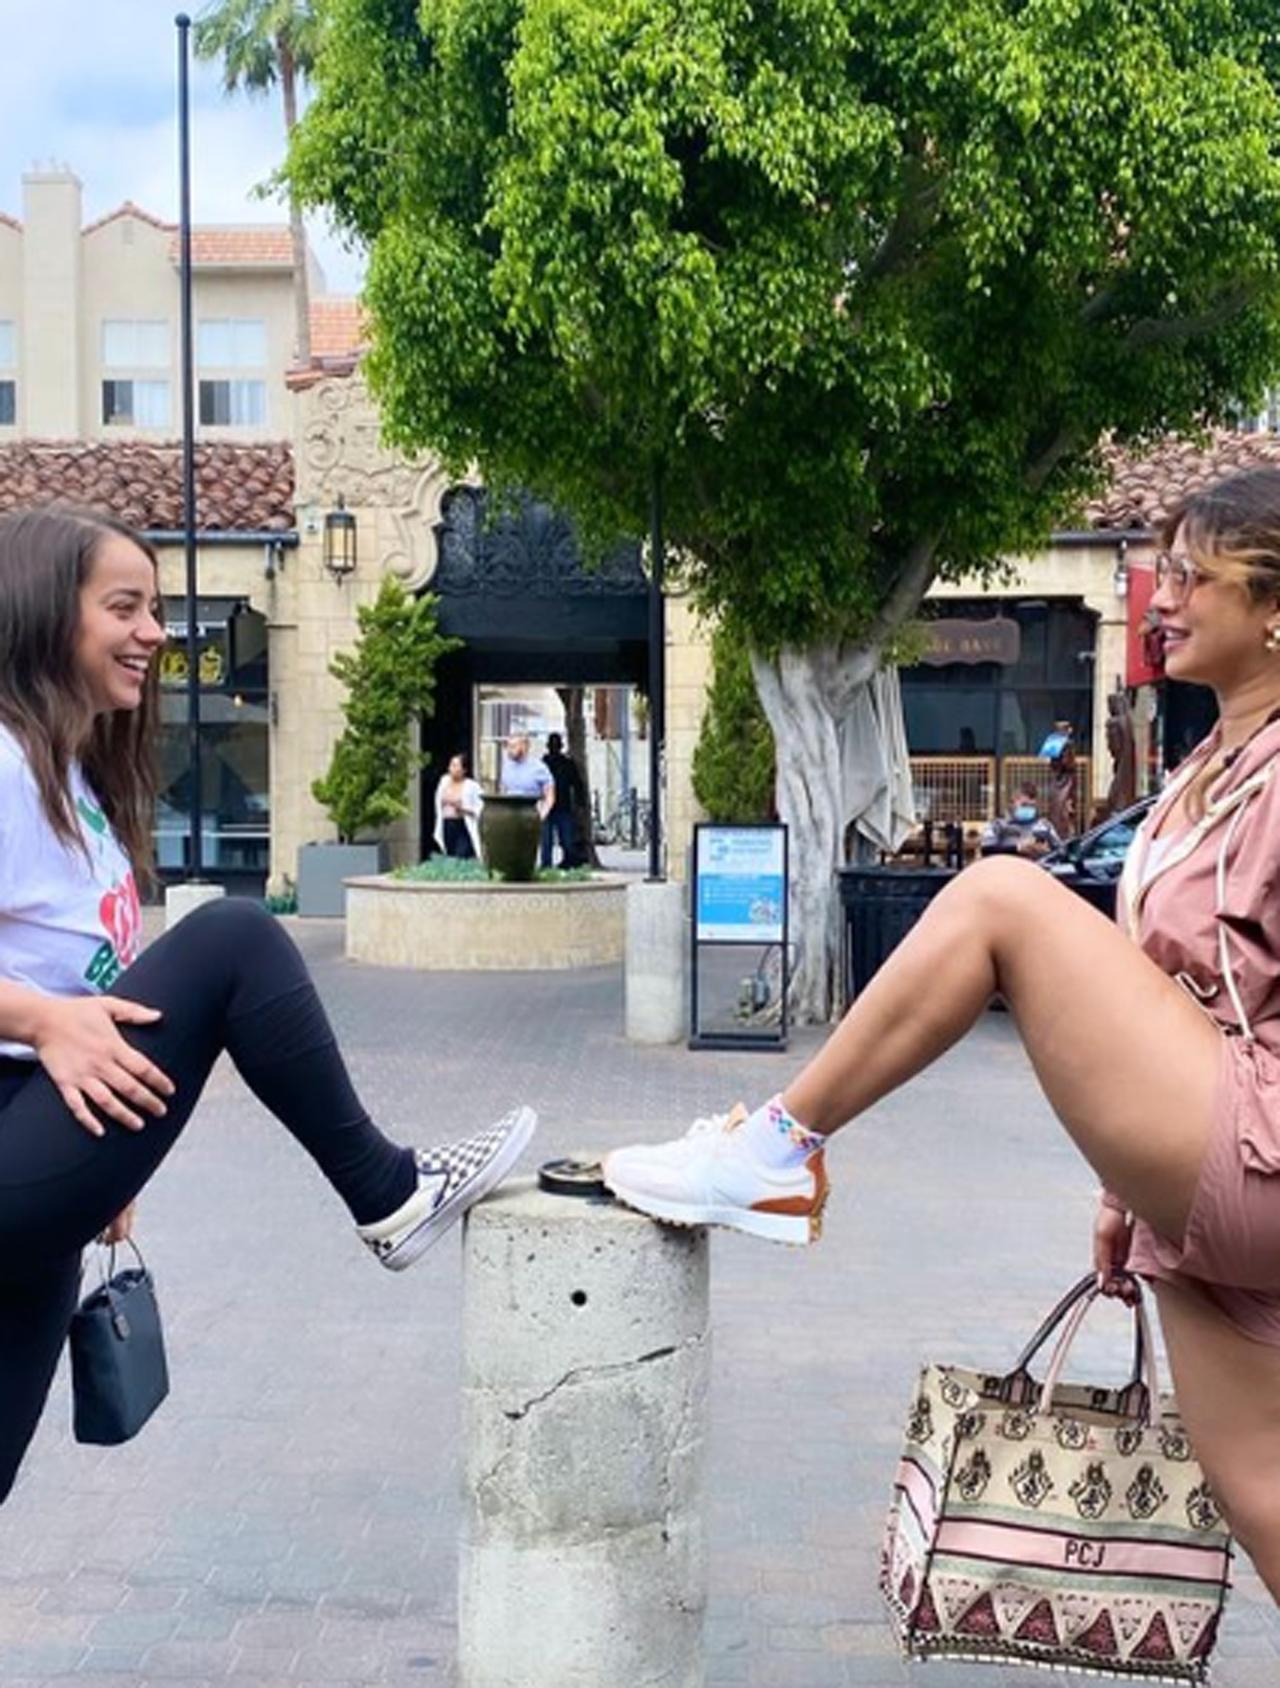 Actor Priyanka Chopra loves spending Sundays outdoors. Her recent Instagram post is proof of this fact. She went out and wandered the streets of LA with her girls and pet dogs.